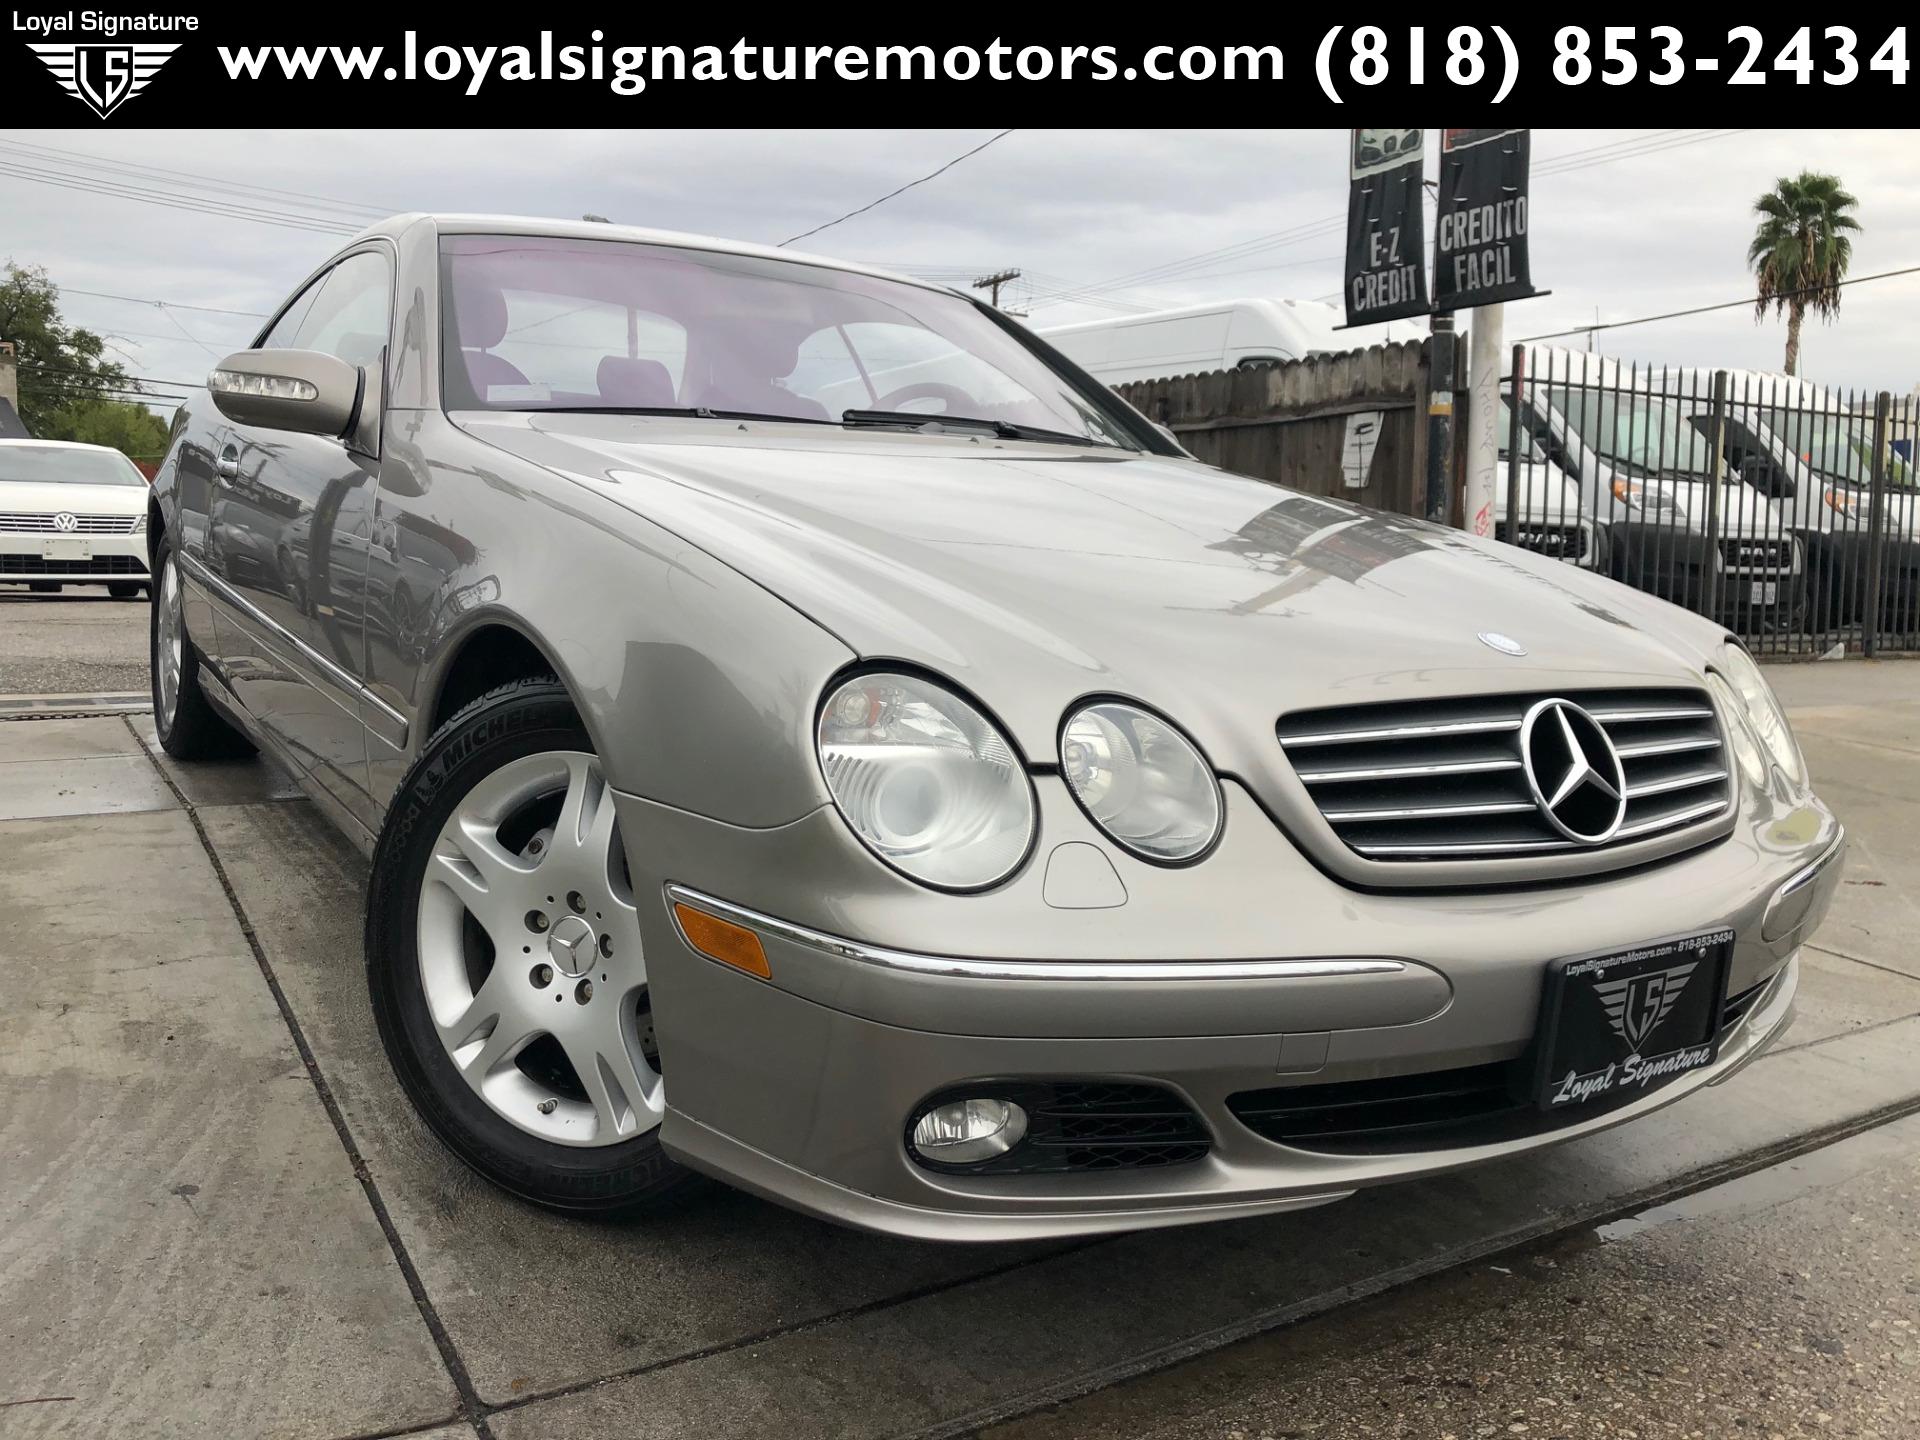 Used 04 Mercedes Benz Cl Class Cl 500 For Sale 4 995 Loyal Signature Motors Inc Stock